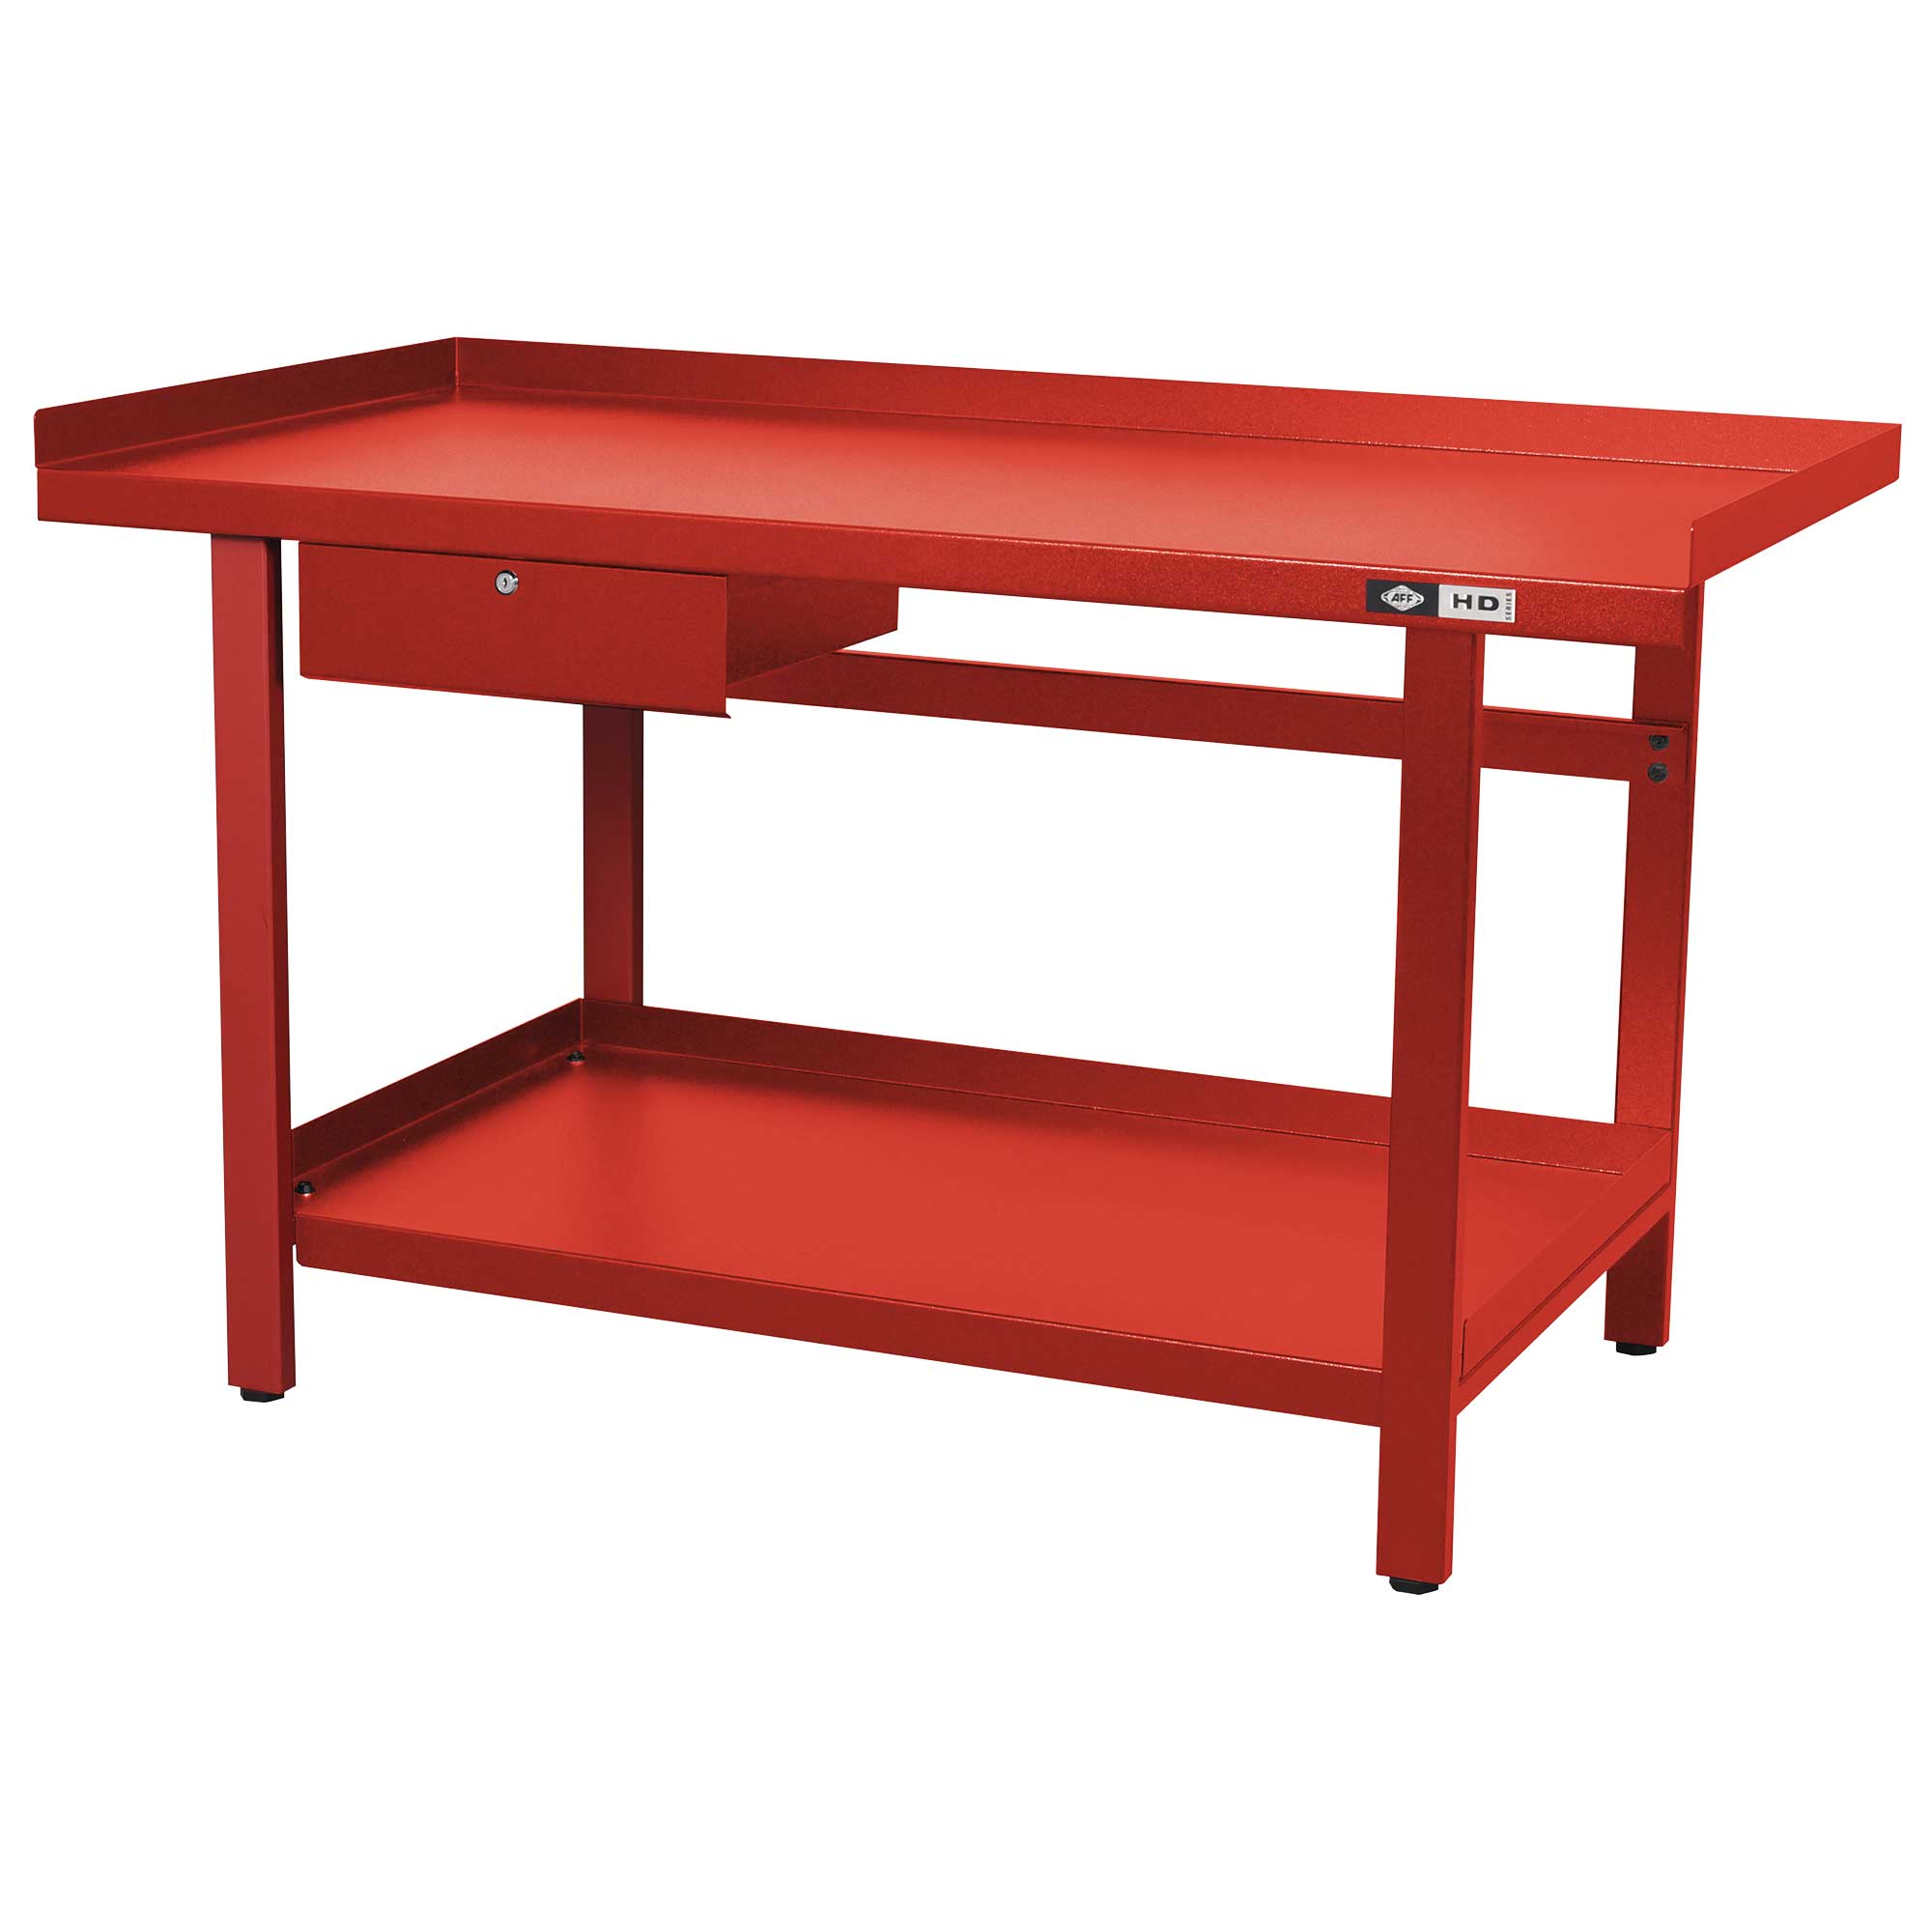 American Forge and Foundry - Heavy-Duty Workbench -  3995